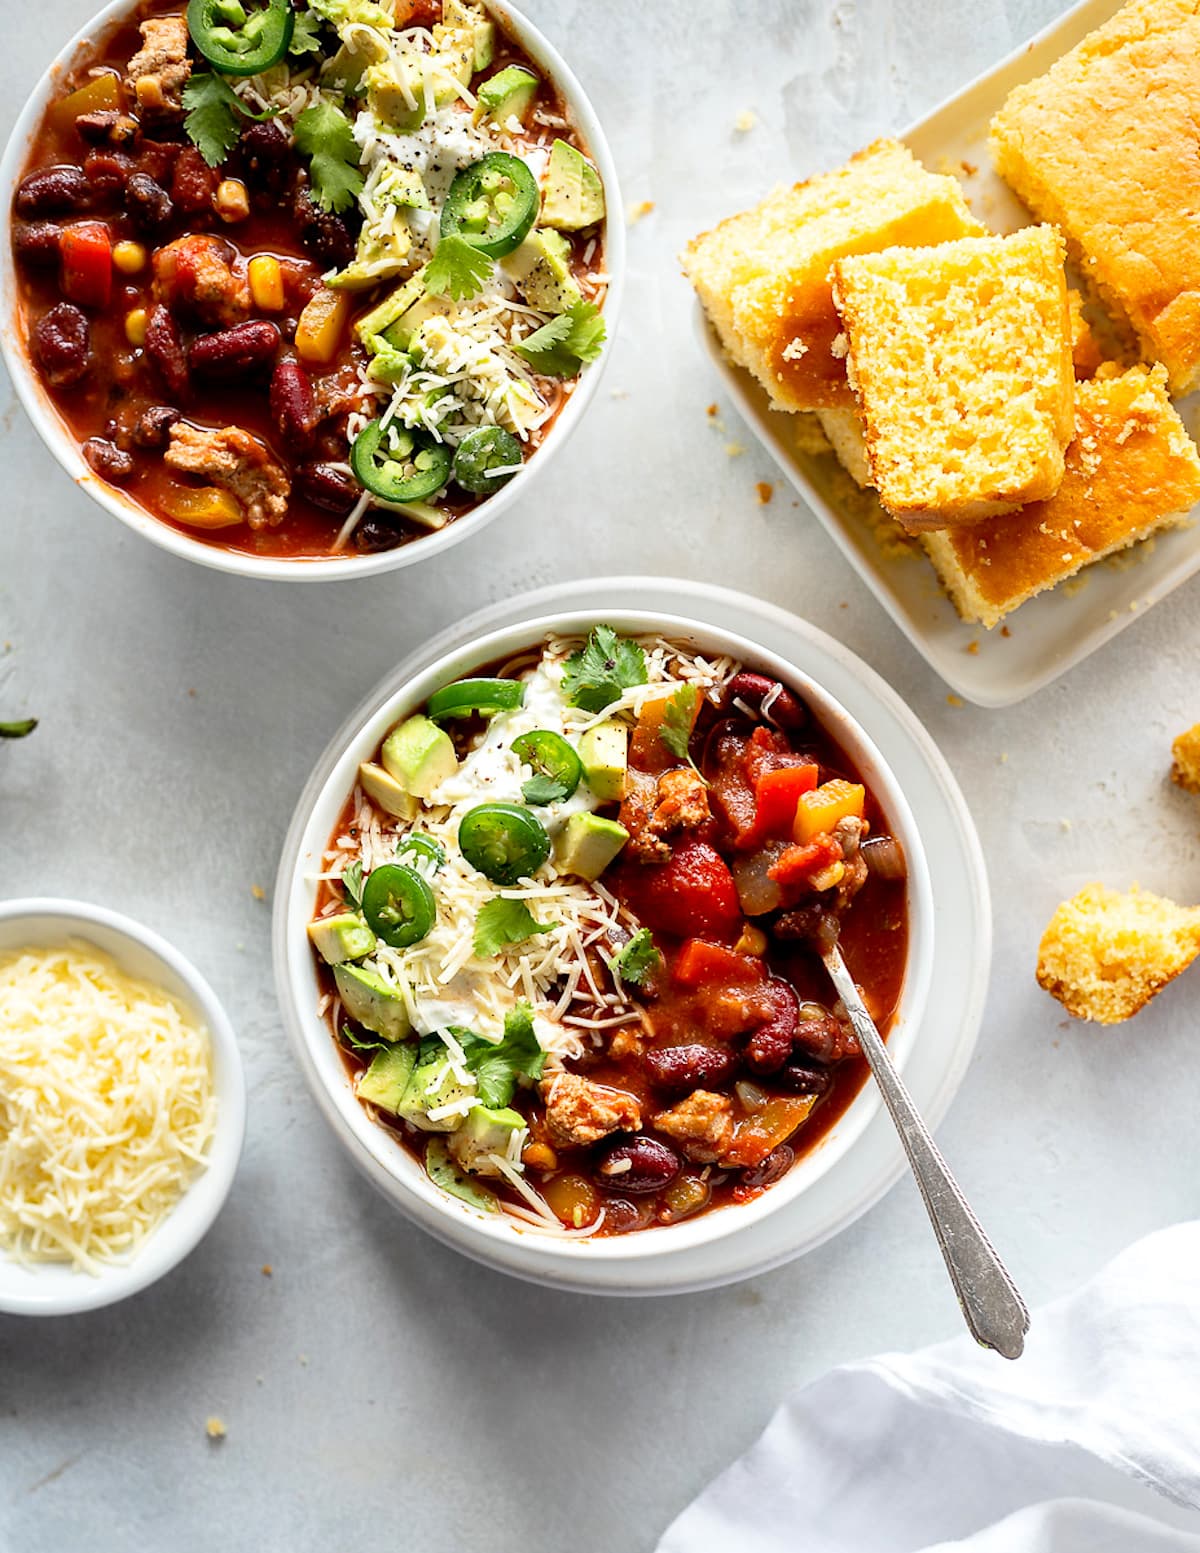 The Best Healthy Turkey Chili You'll Ever Eat